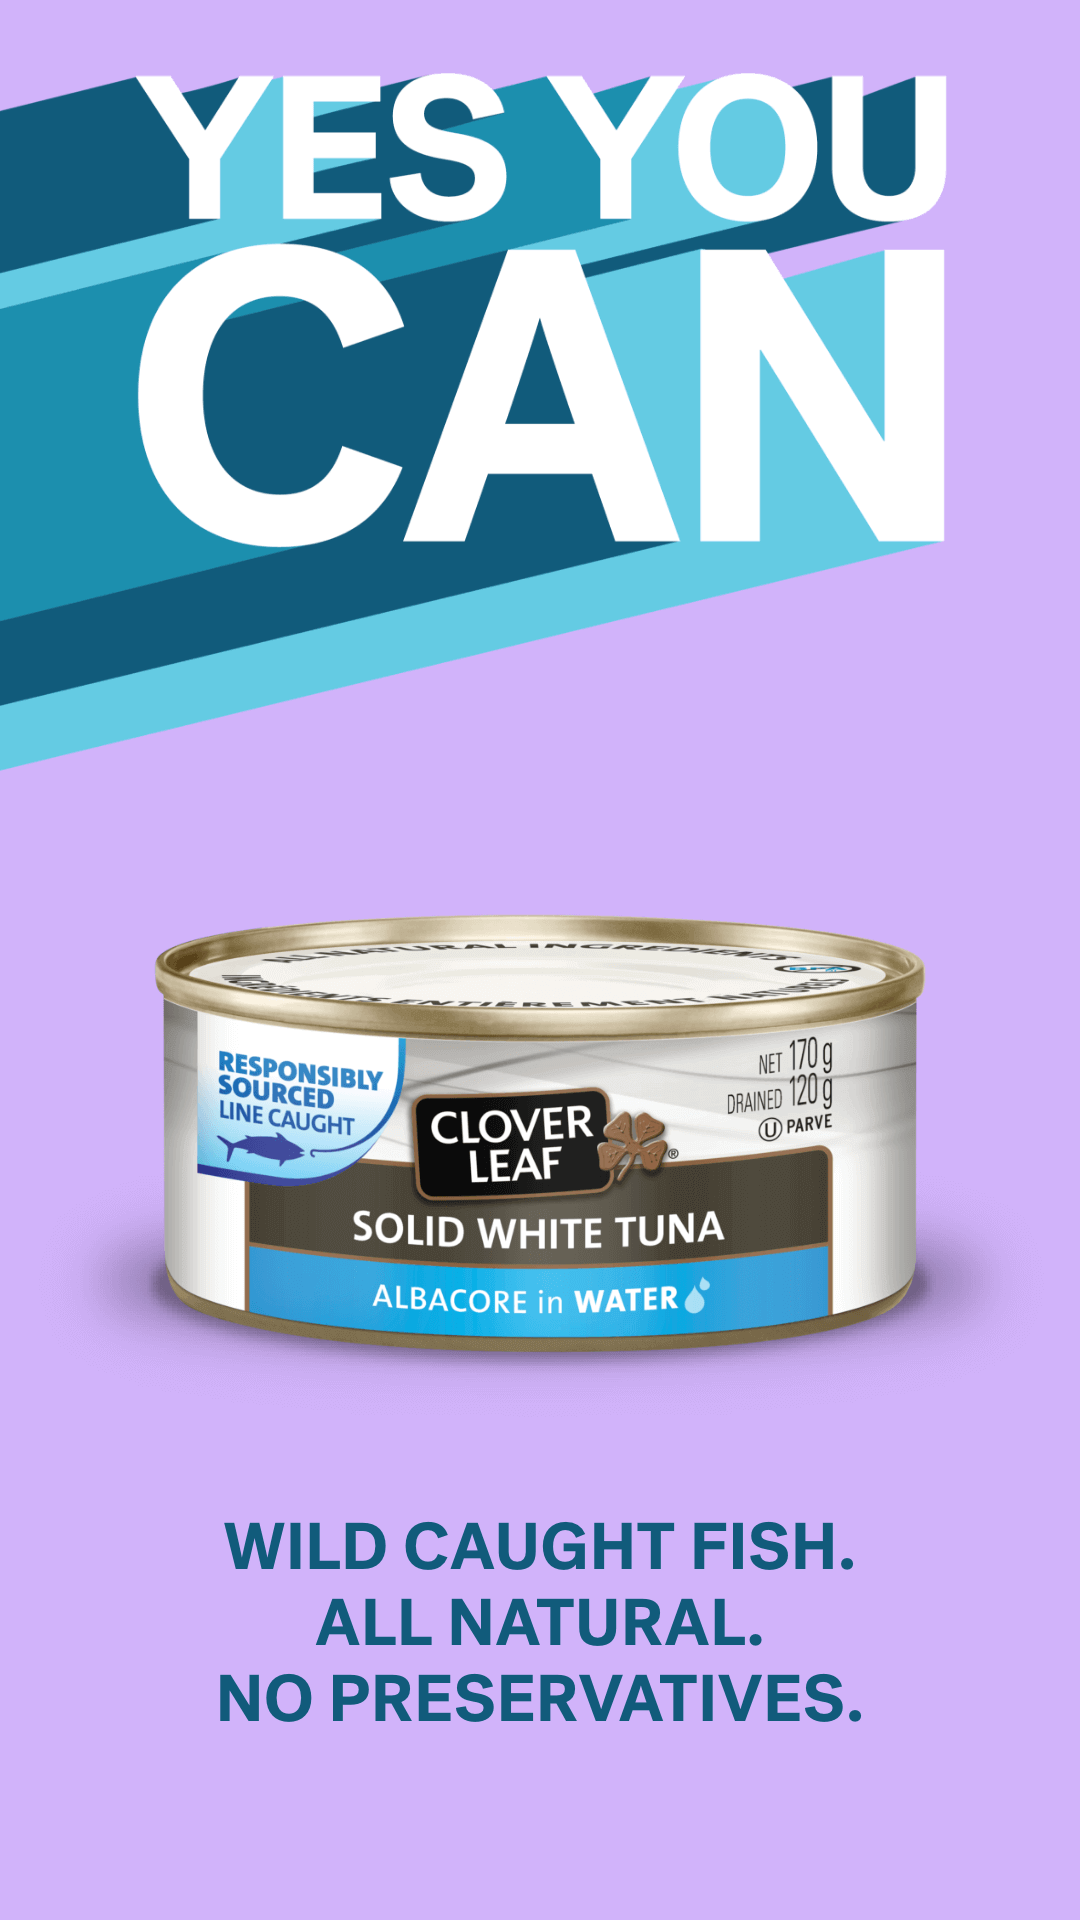 Yes You Can.  Wild caught fish. All natural. no preservatives.